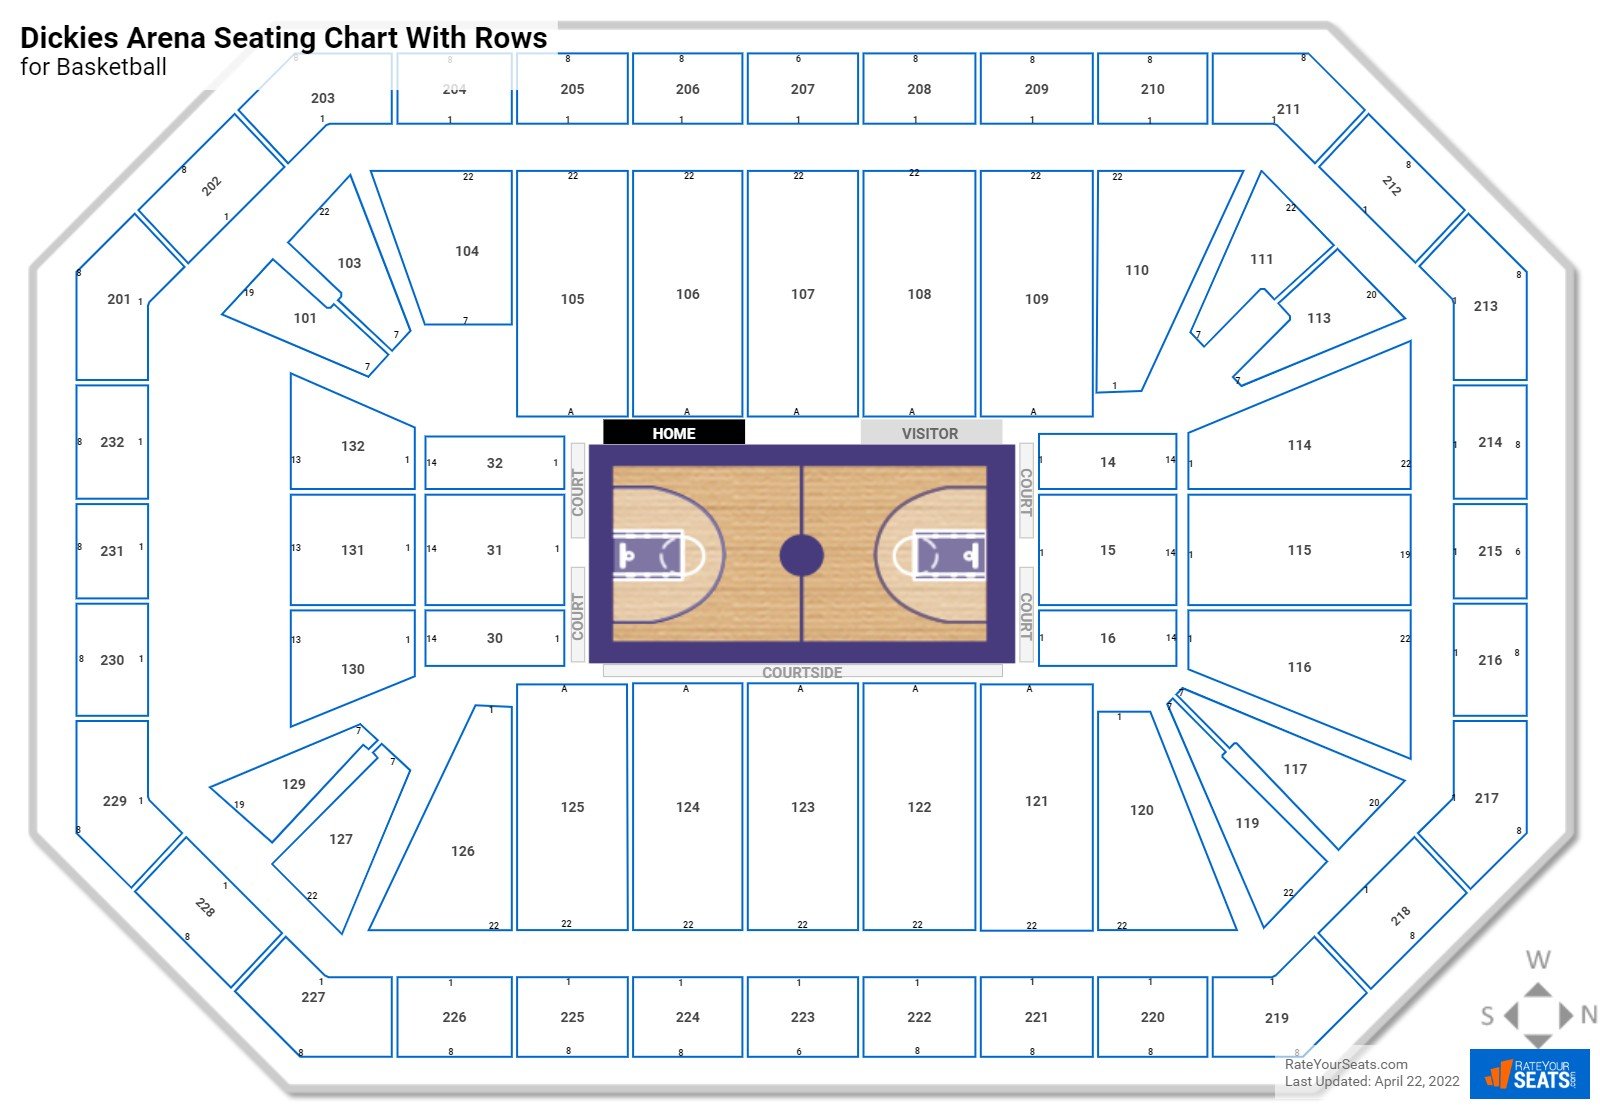 Dickies Arena seating chart with row numbers